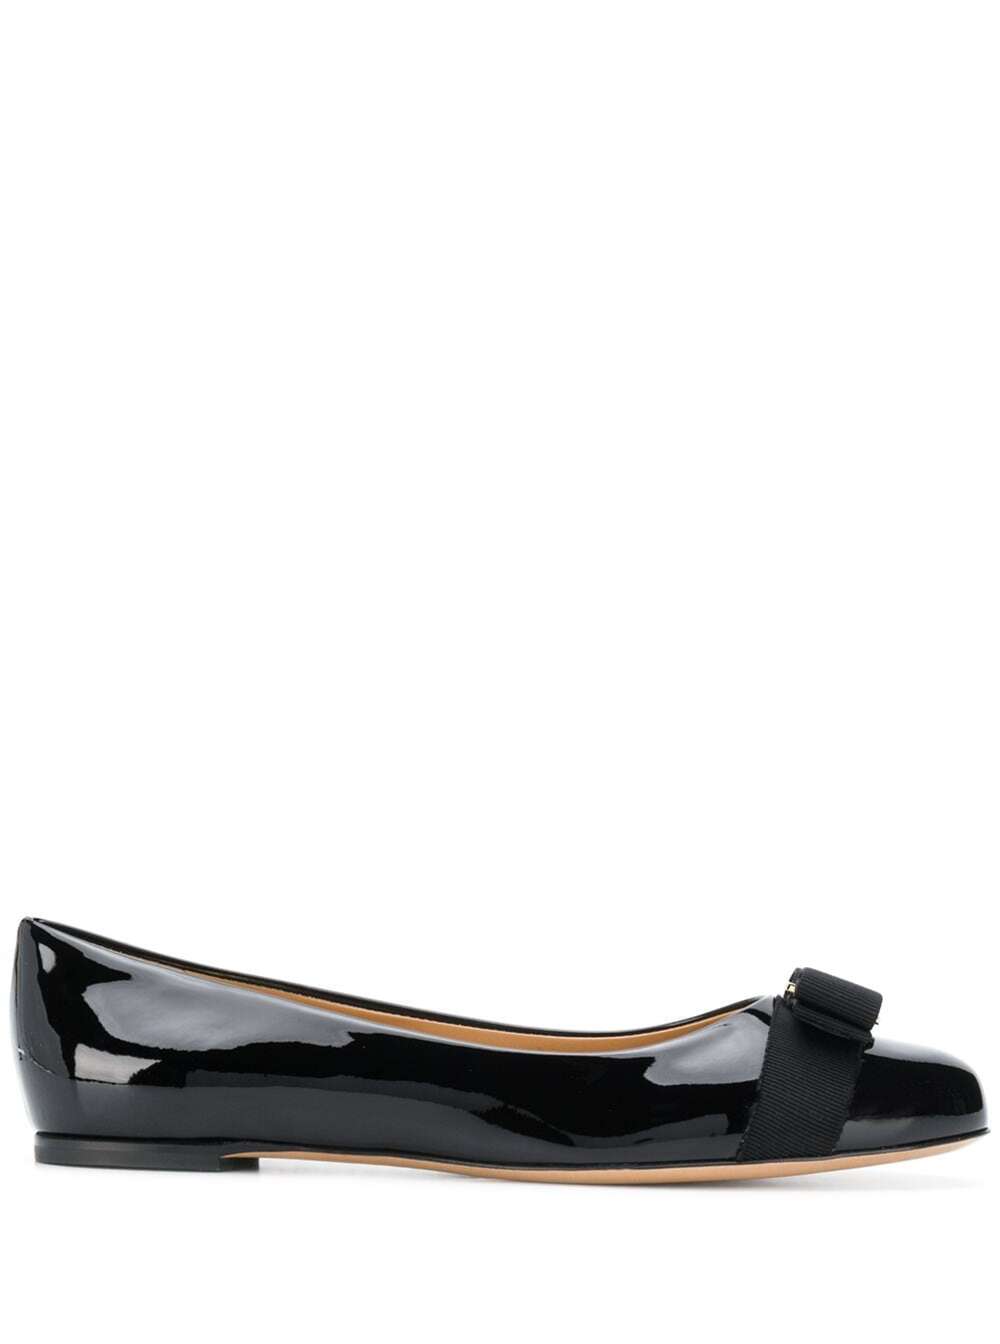 Salvatore Ferragamo Womans Varina Patent Leather Flat Shoes With Bow